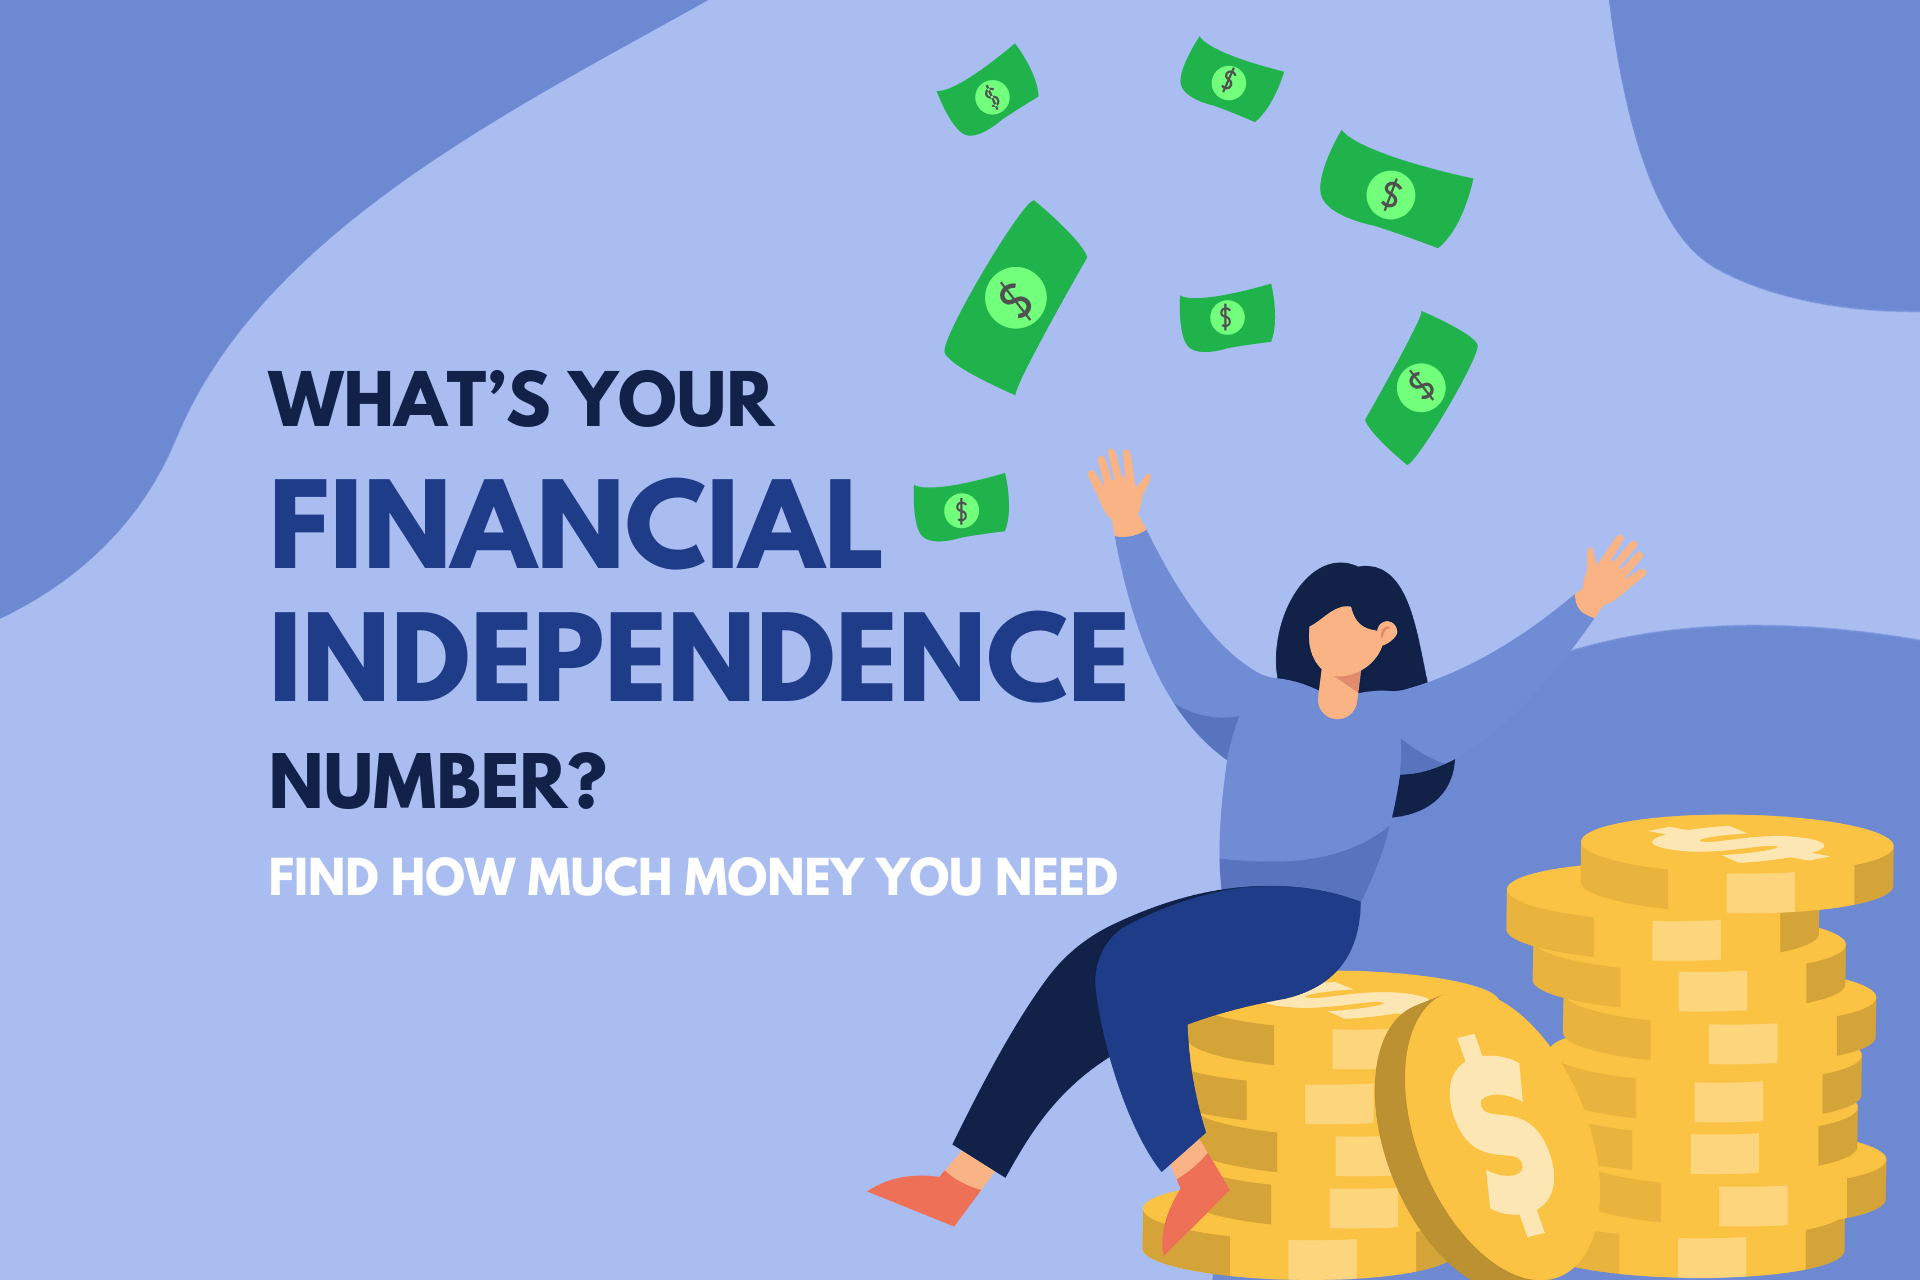 how much money do you need to be financially independent